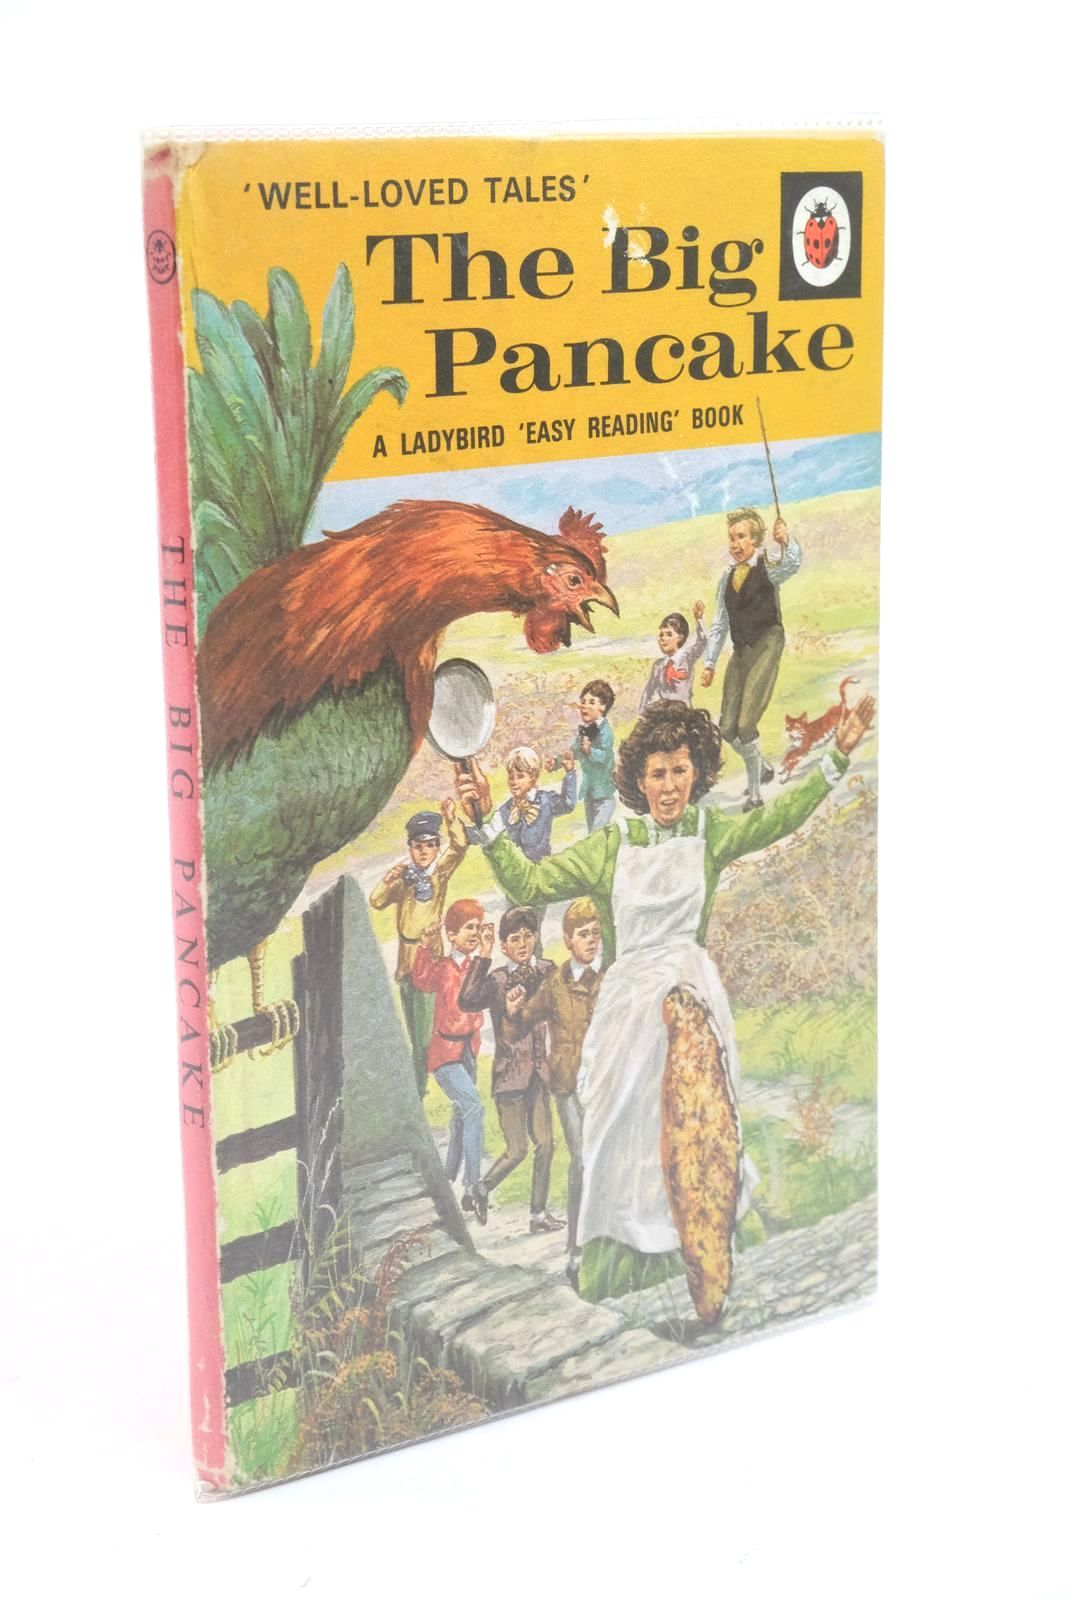 Photo of THE BIG PANCAKE written by Southgate, Vera illustrated by Lumley, Robert published by Wills &amp; Hepworth Ltd. (STOCK CODE: 1322382)  for sale by Stella & Rose's Books